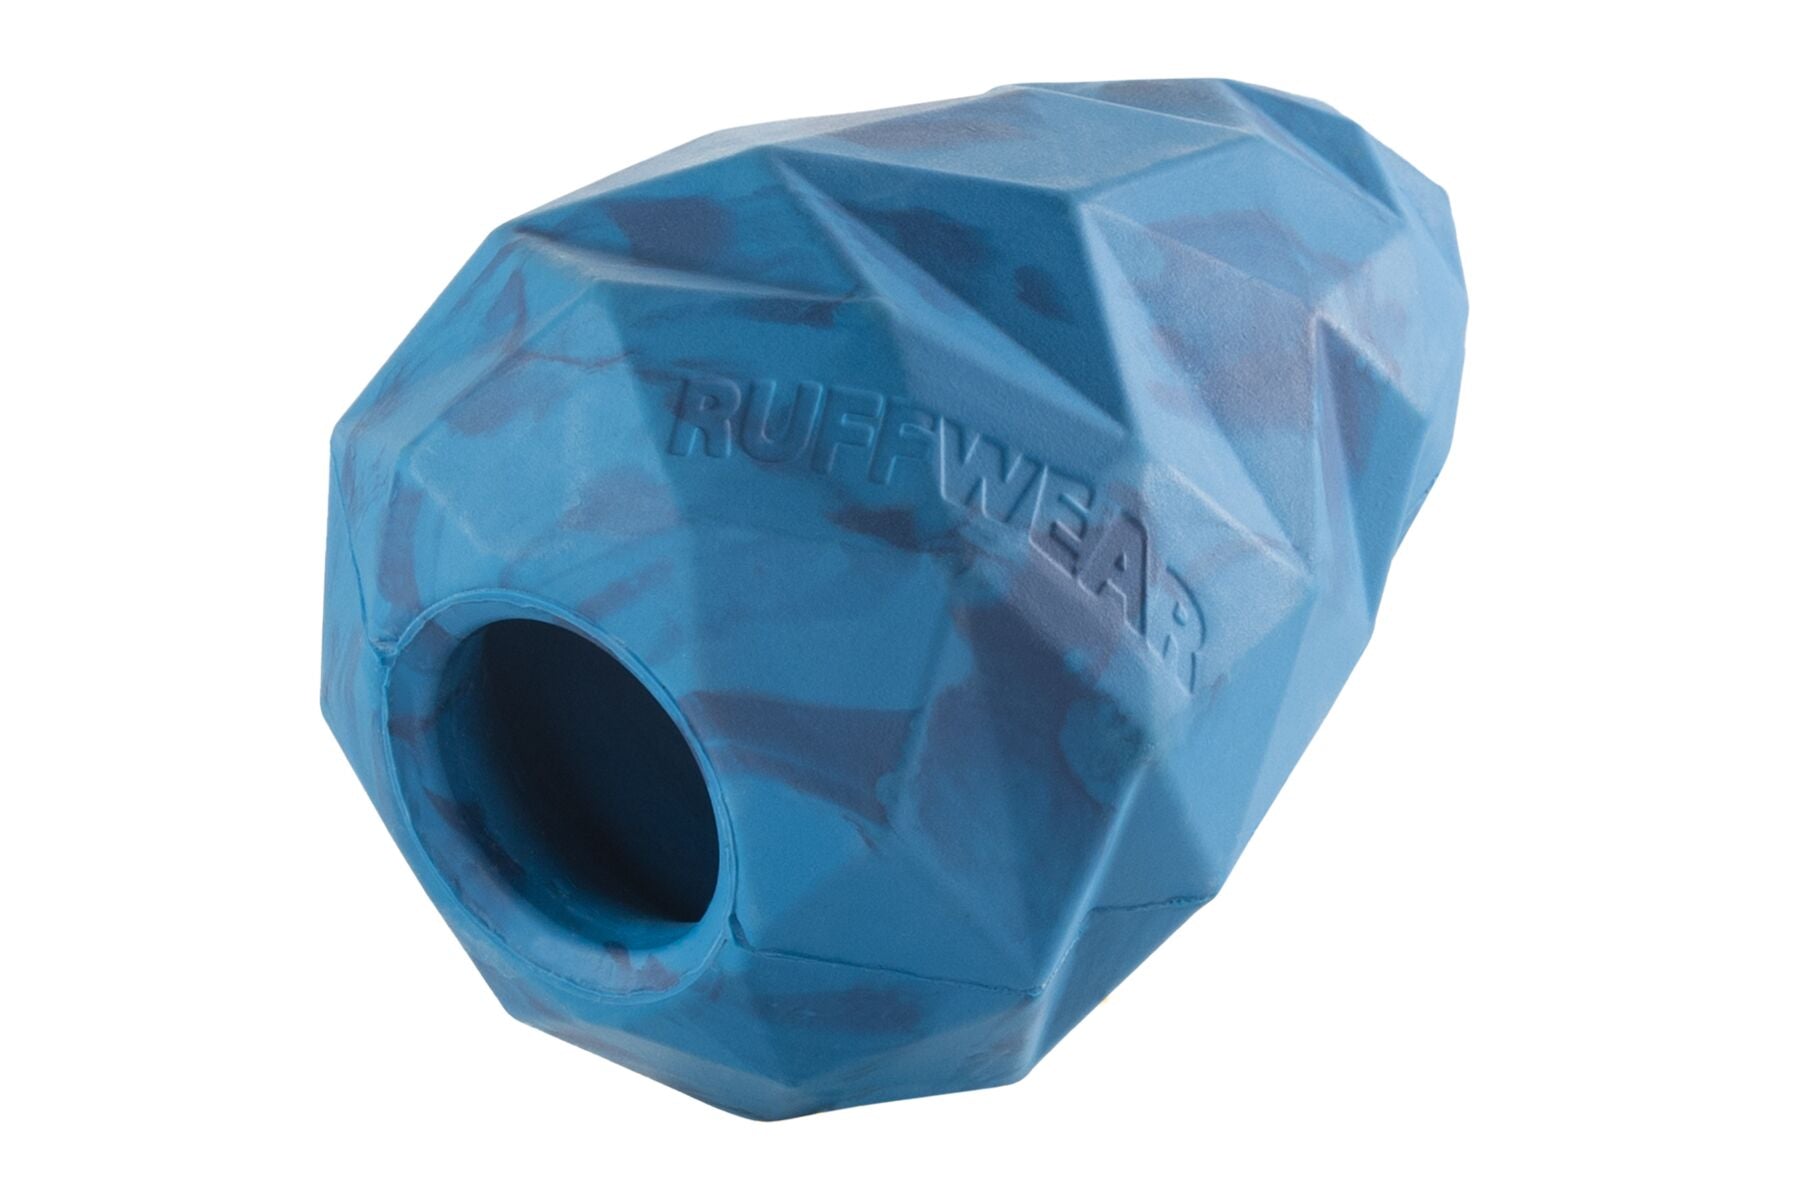 Picture of Ruffwear's Gnawt-a-Cone™ toy in Blue Pool color. 